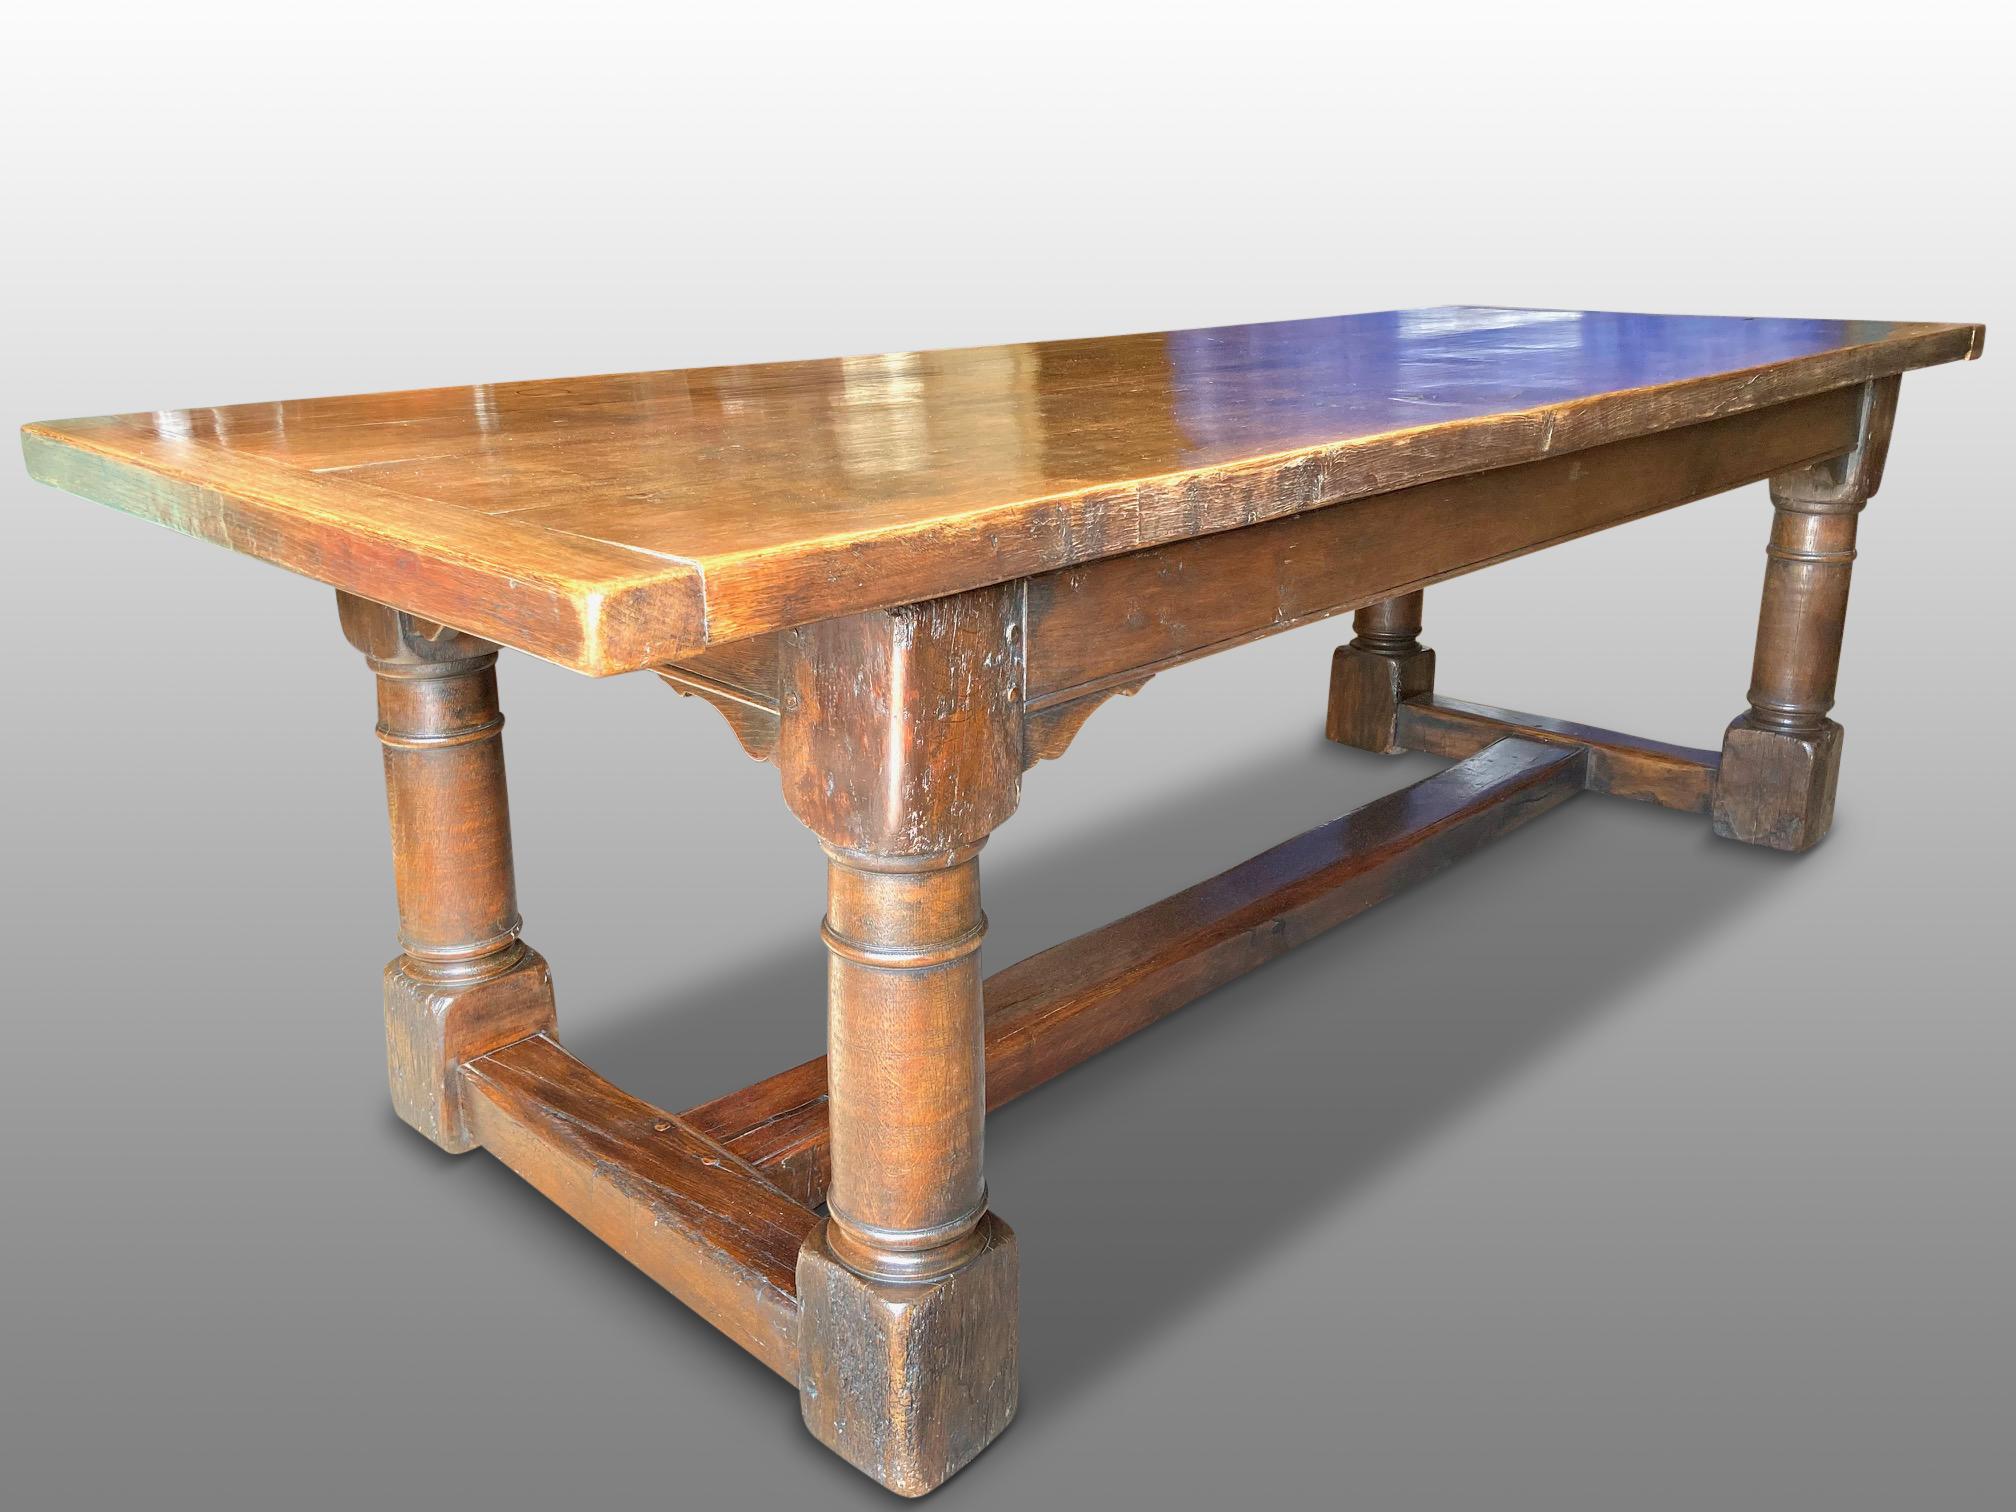 Large oak refectory dining table dating to the circa 1890s.
This is a great size family dining table seating up to 10 people. The top is constructed
of 4 thick planks and cleated at the ends. There is a good overhang for setting in the chairs. The